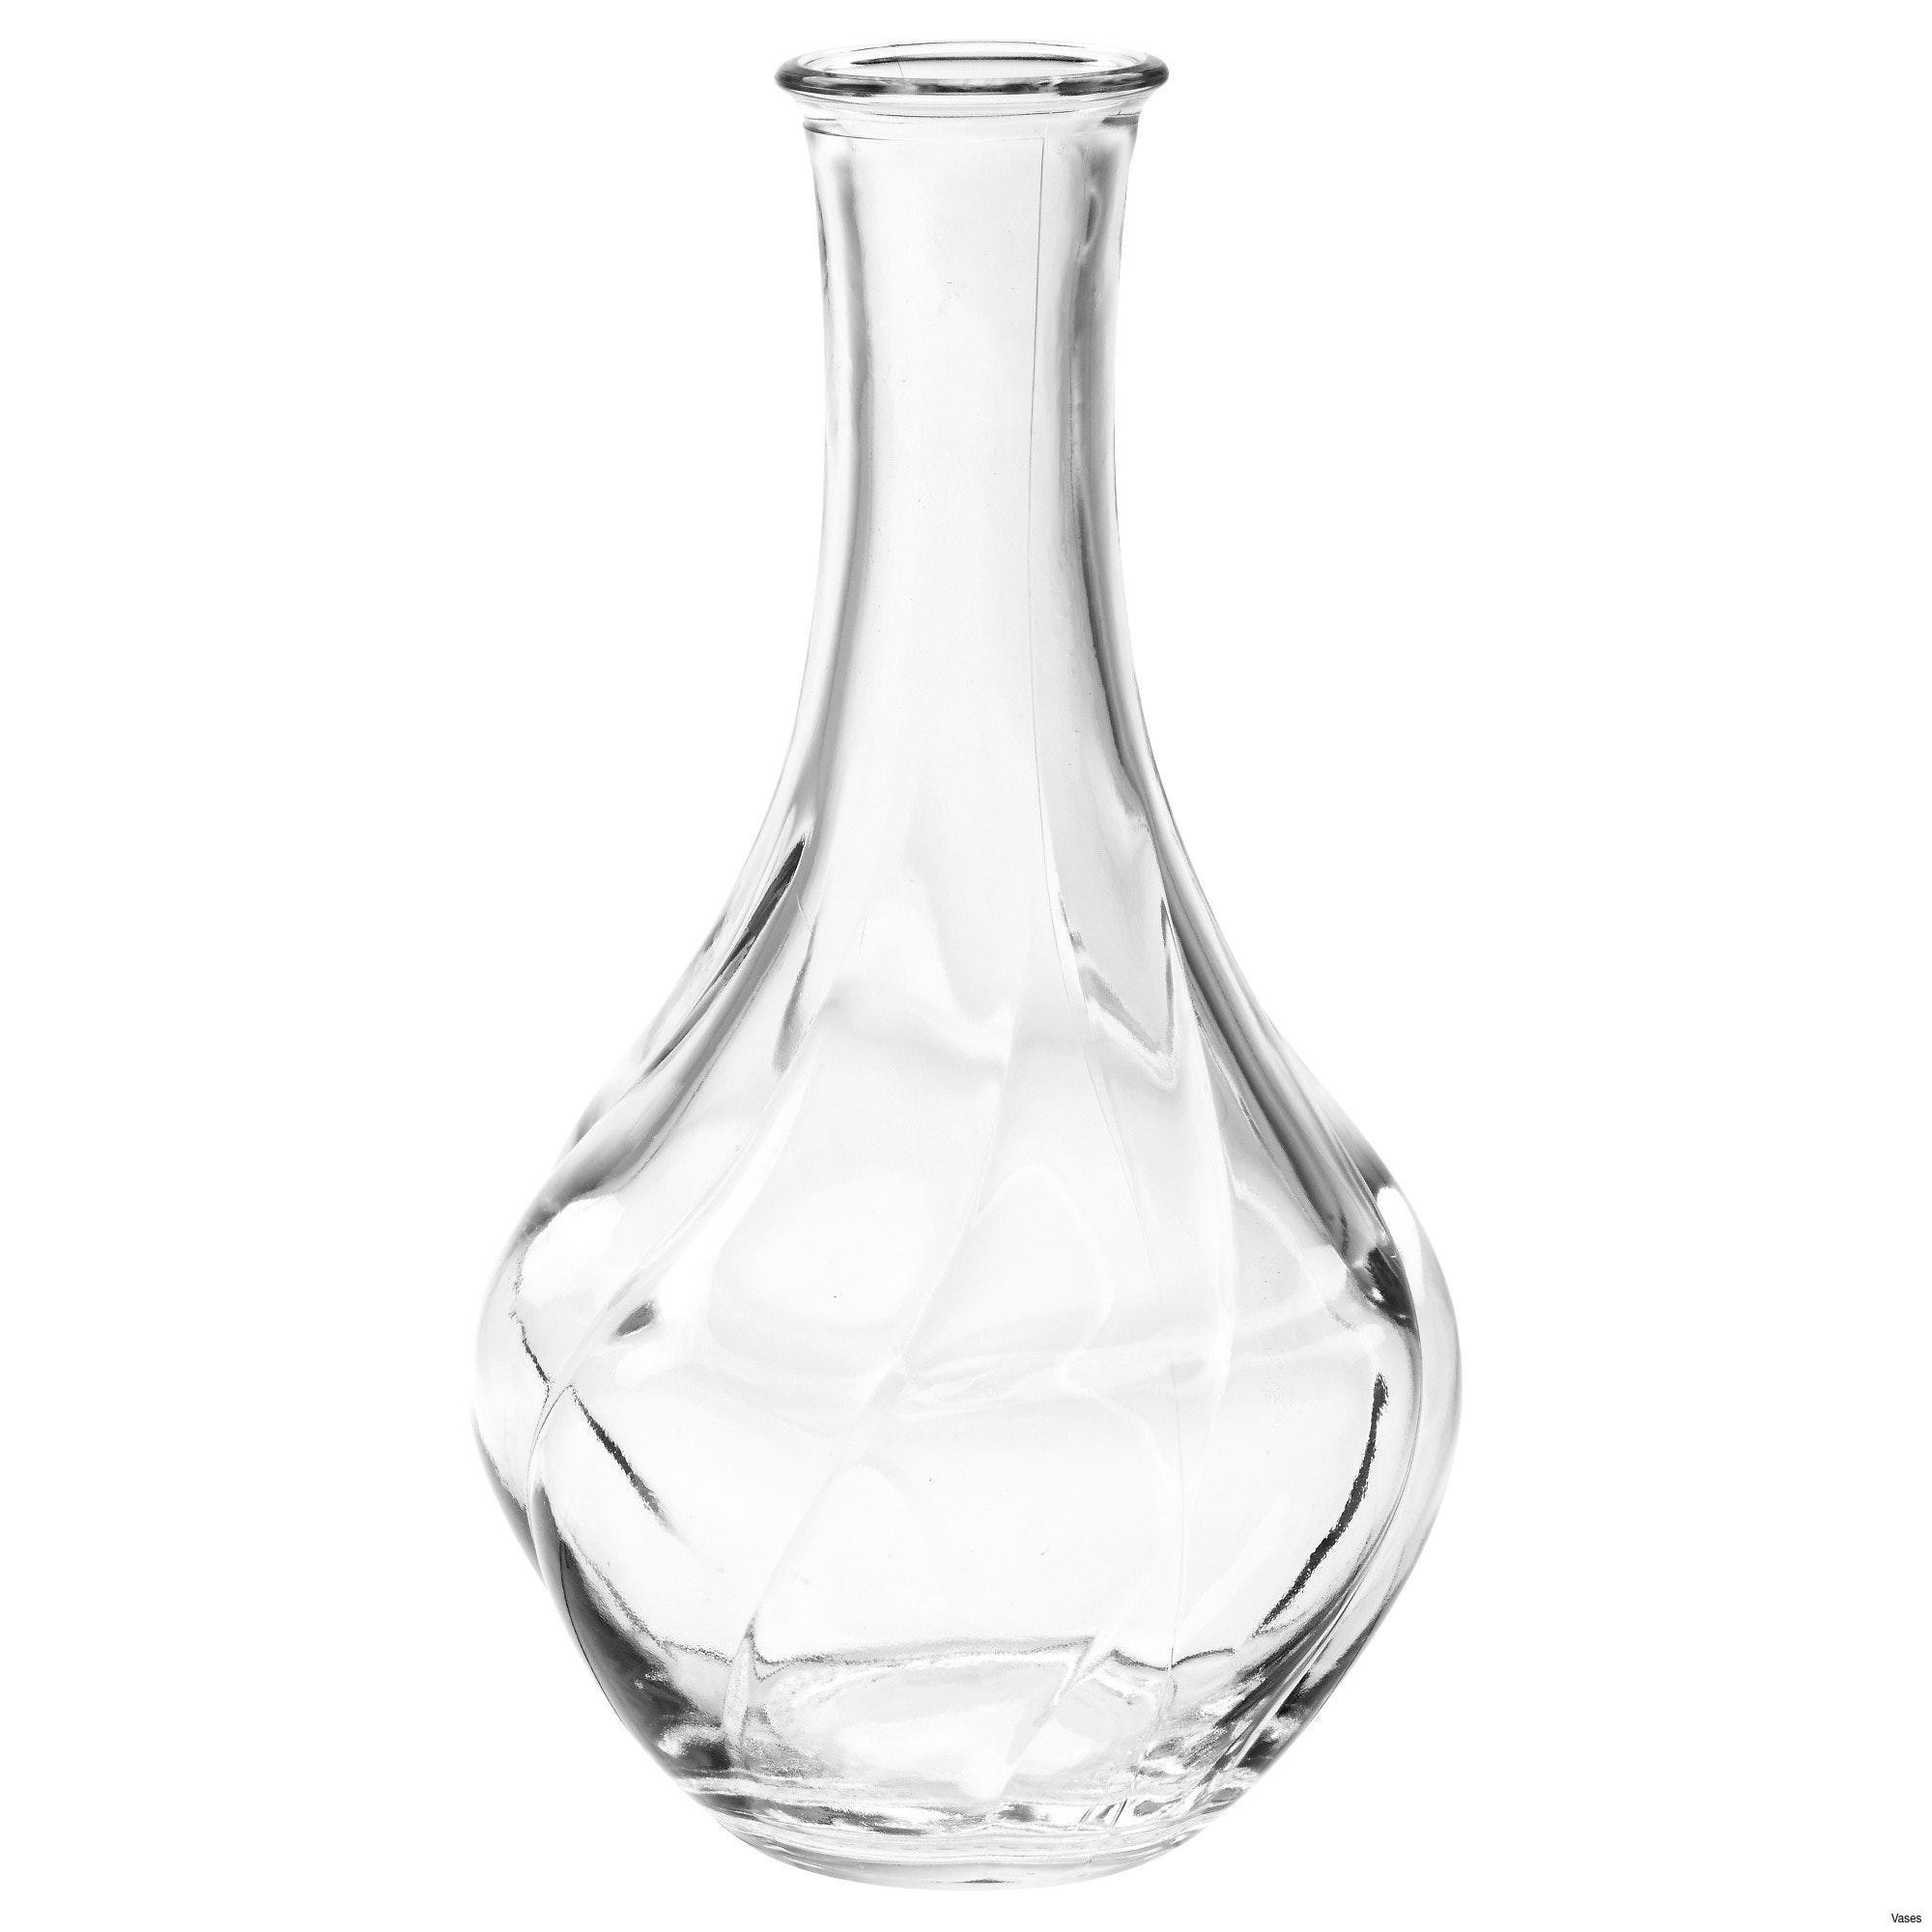 26 Fabulous Face Vases for Sale 2024 free download face vases for sale of photos of large white vase vases artificial plants collection for large white vase pics living room glass vases fresh clear vase 0d tags amazing and of